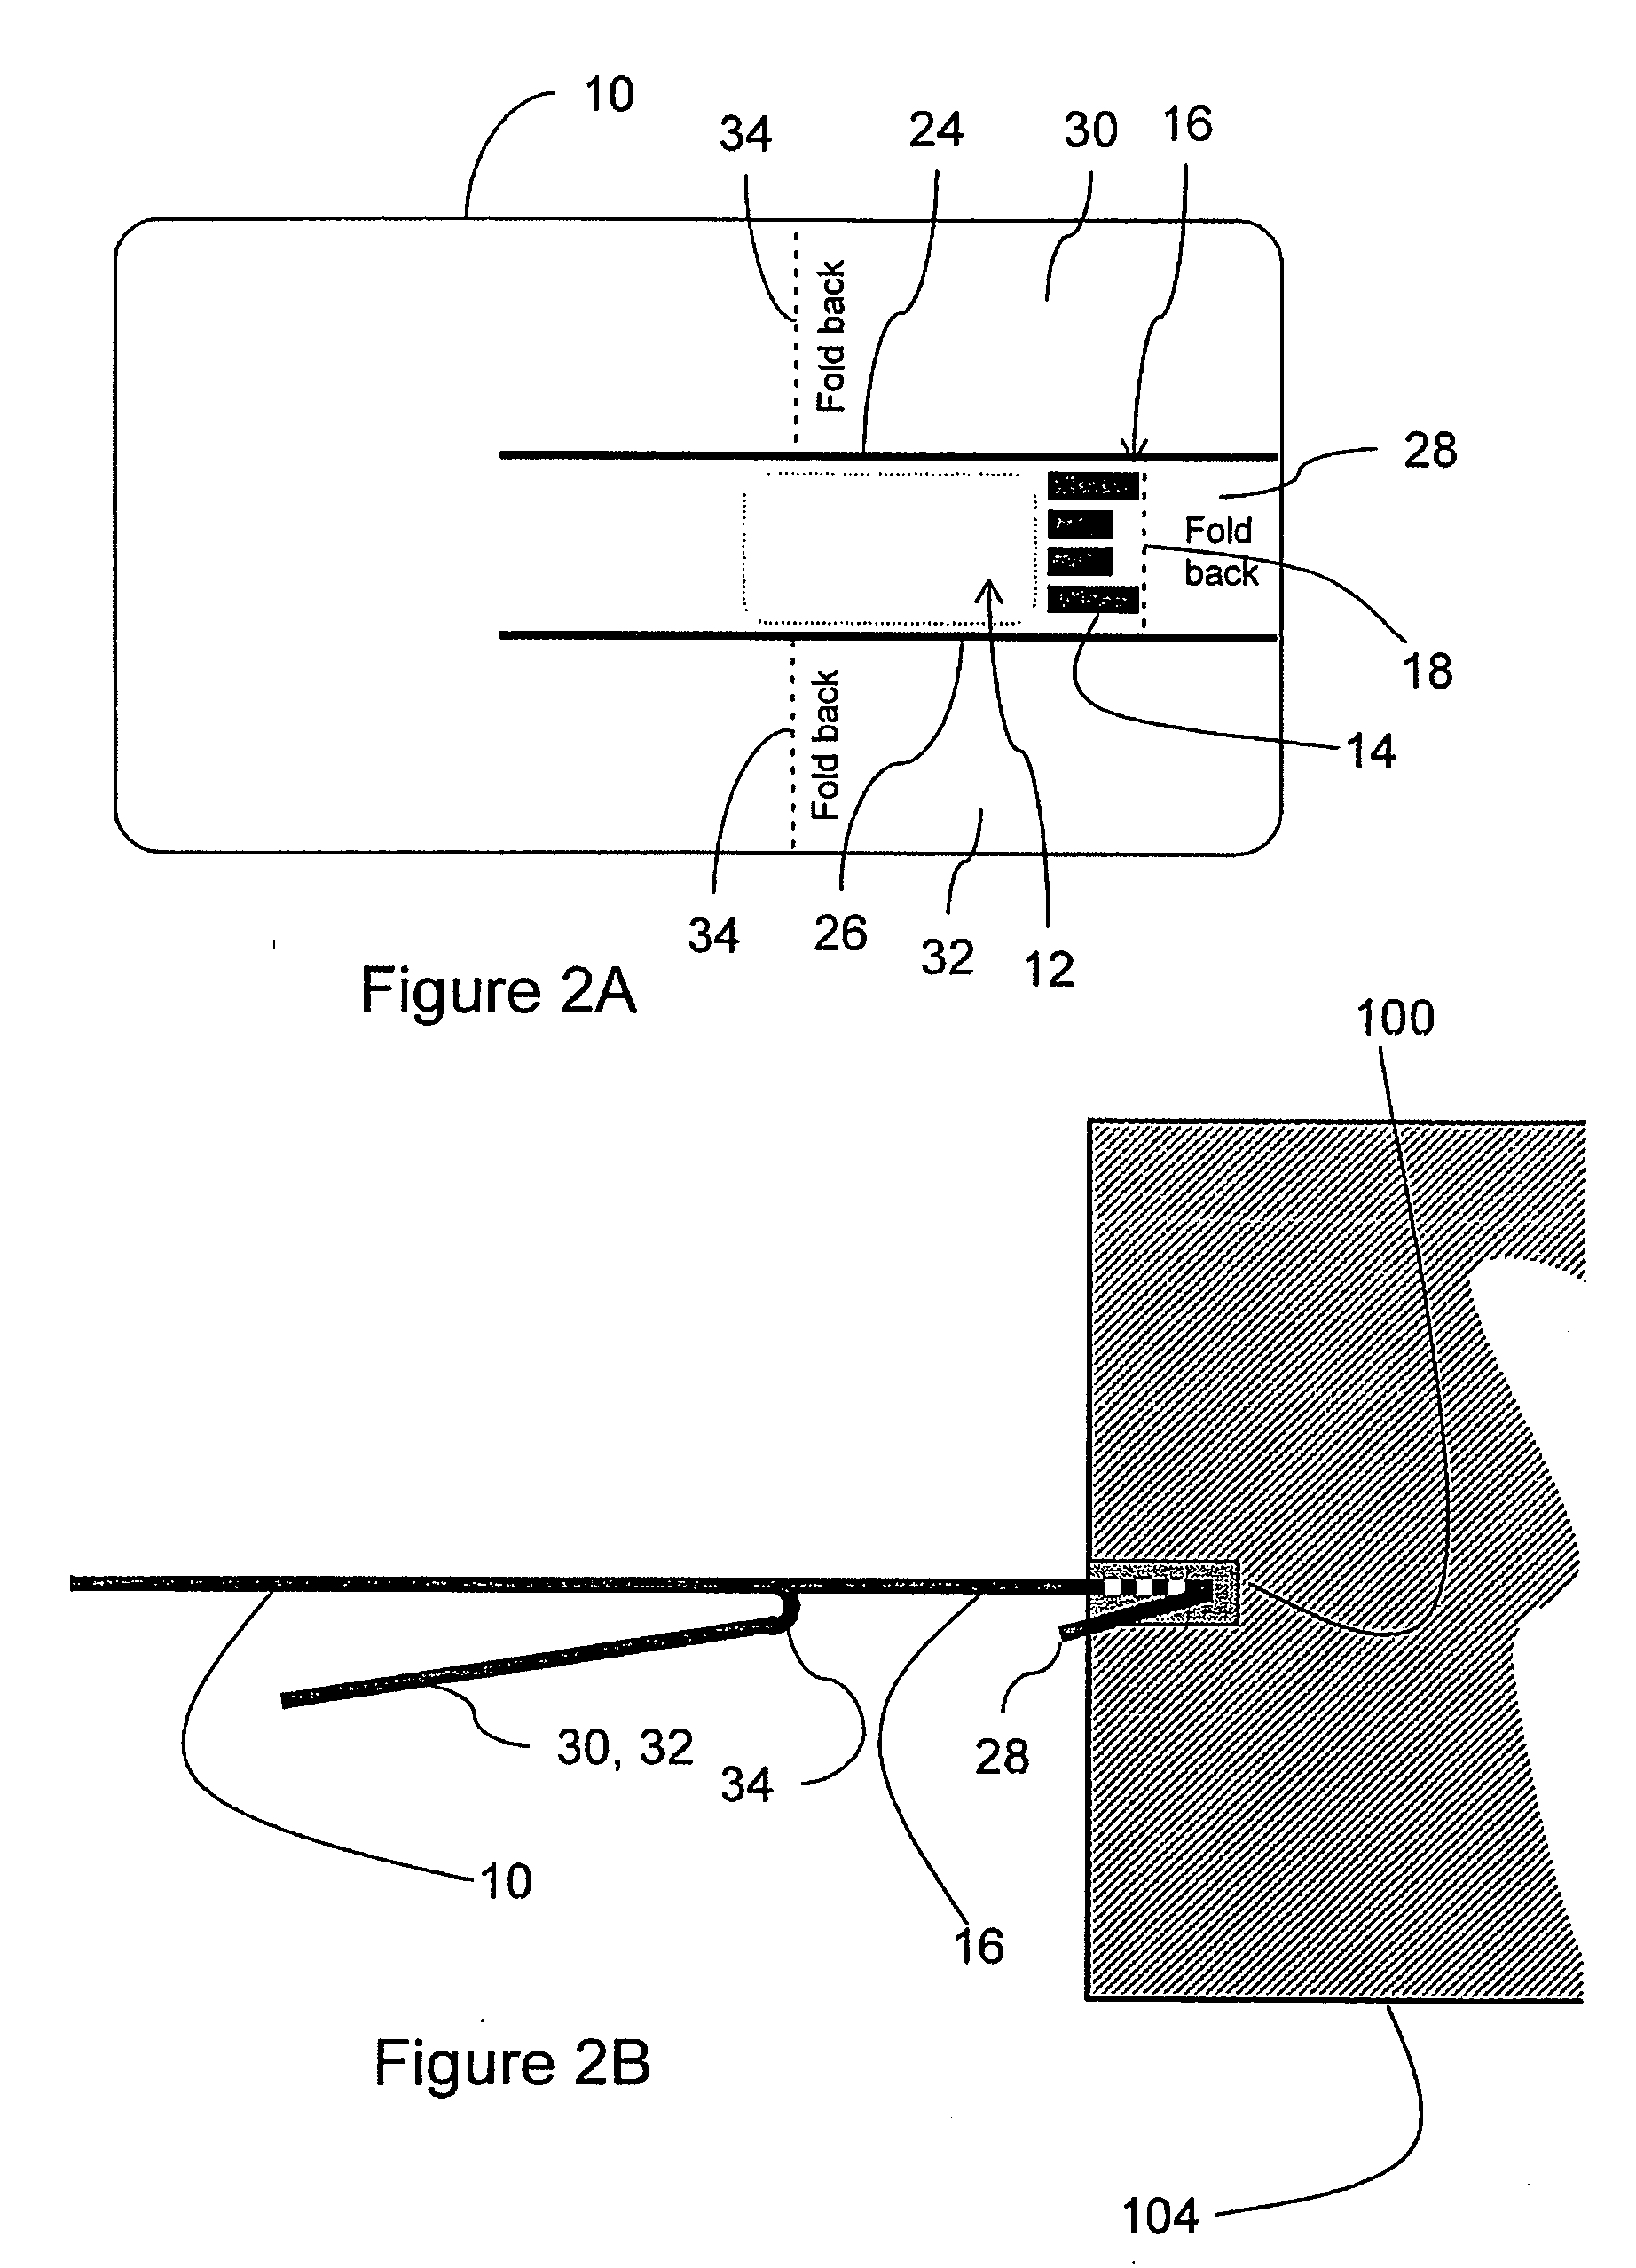 Card device for connection to a USB receptacle